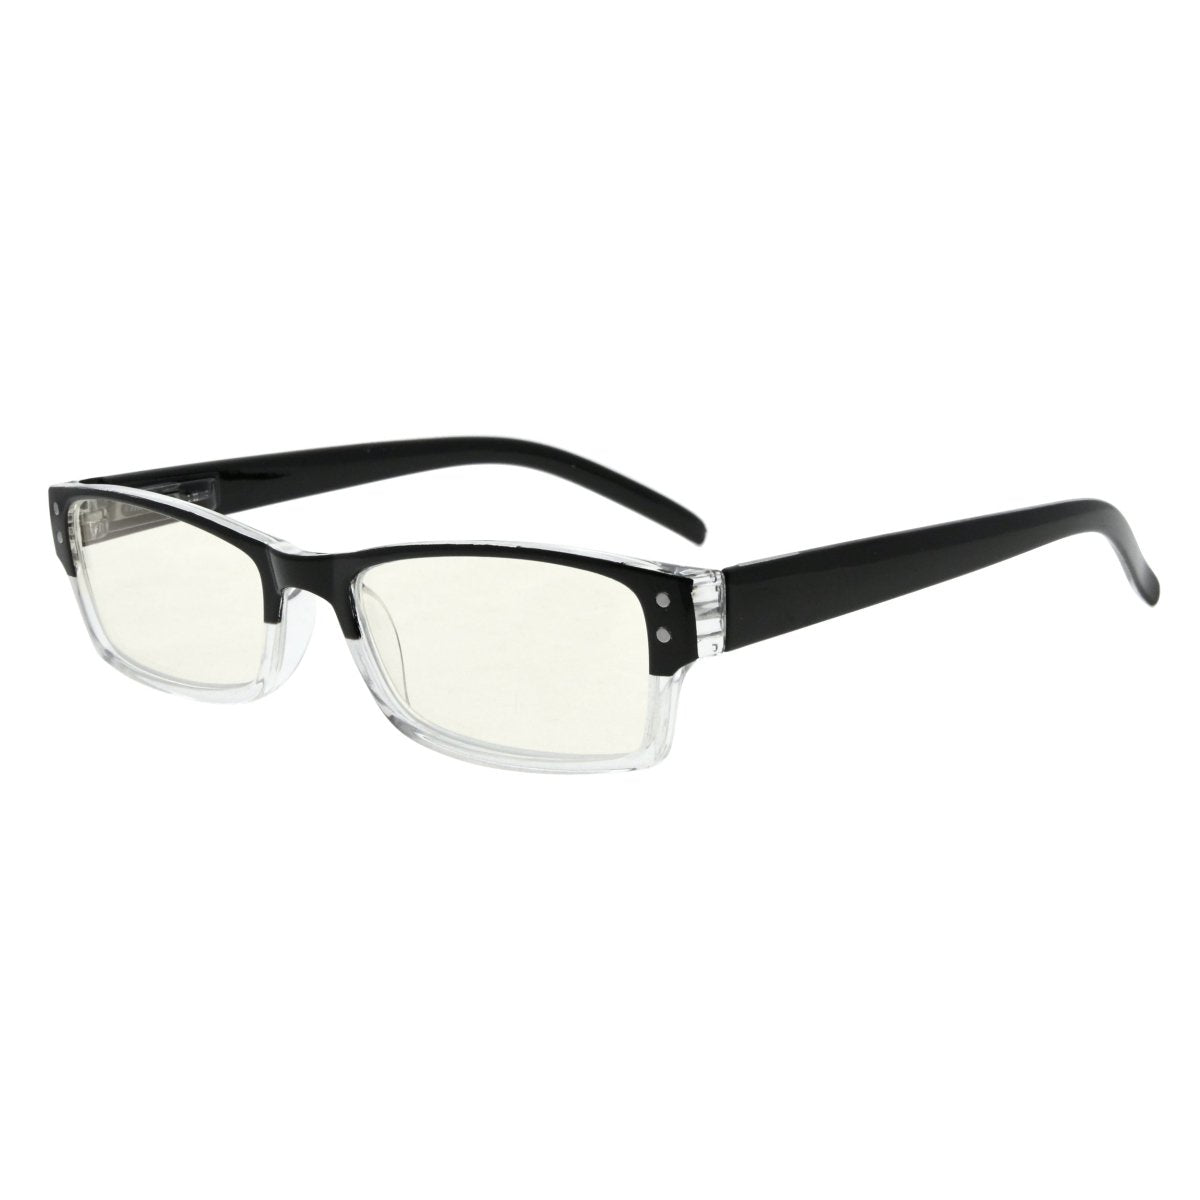 Two-tone Color Computer Reading Glasses CG012eyekeeper.com